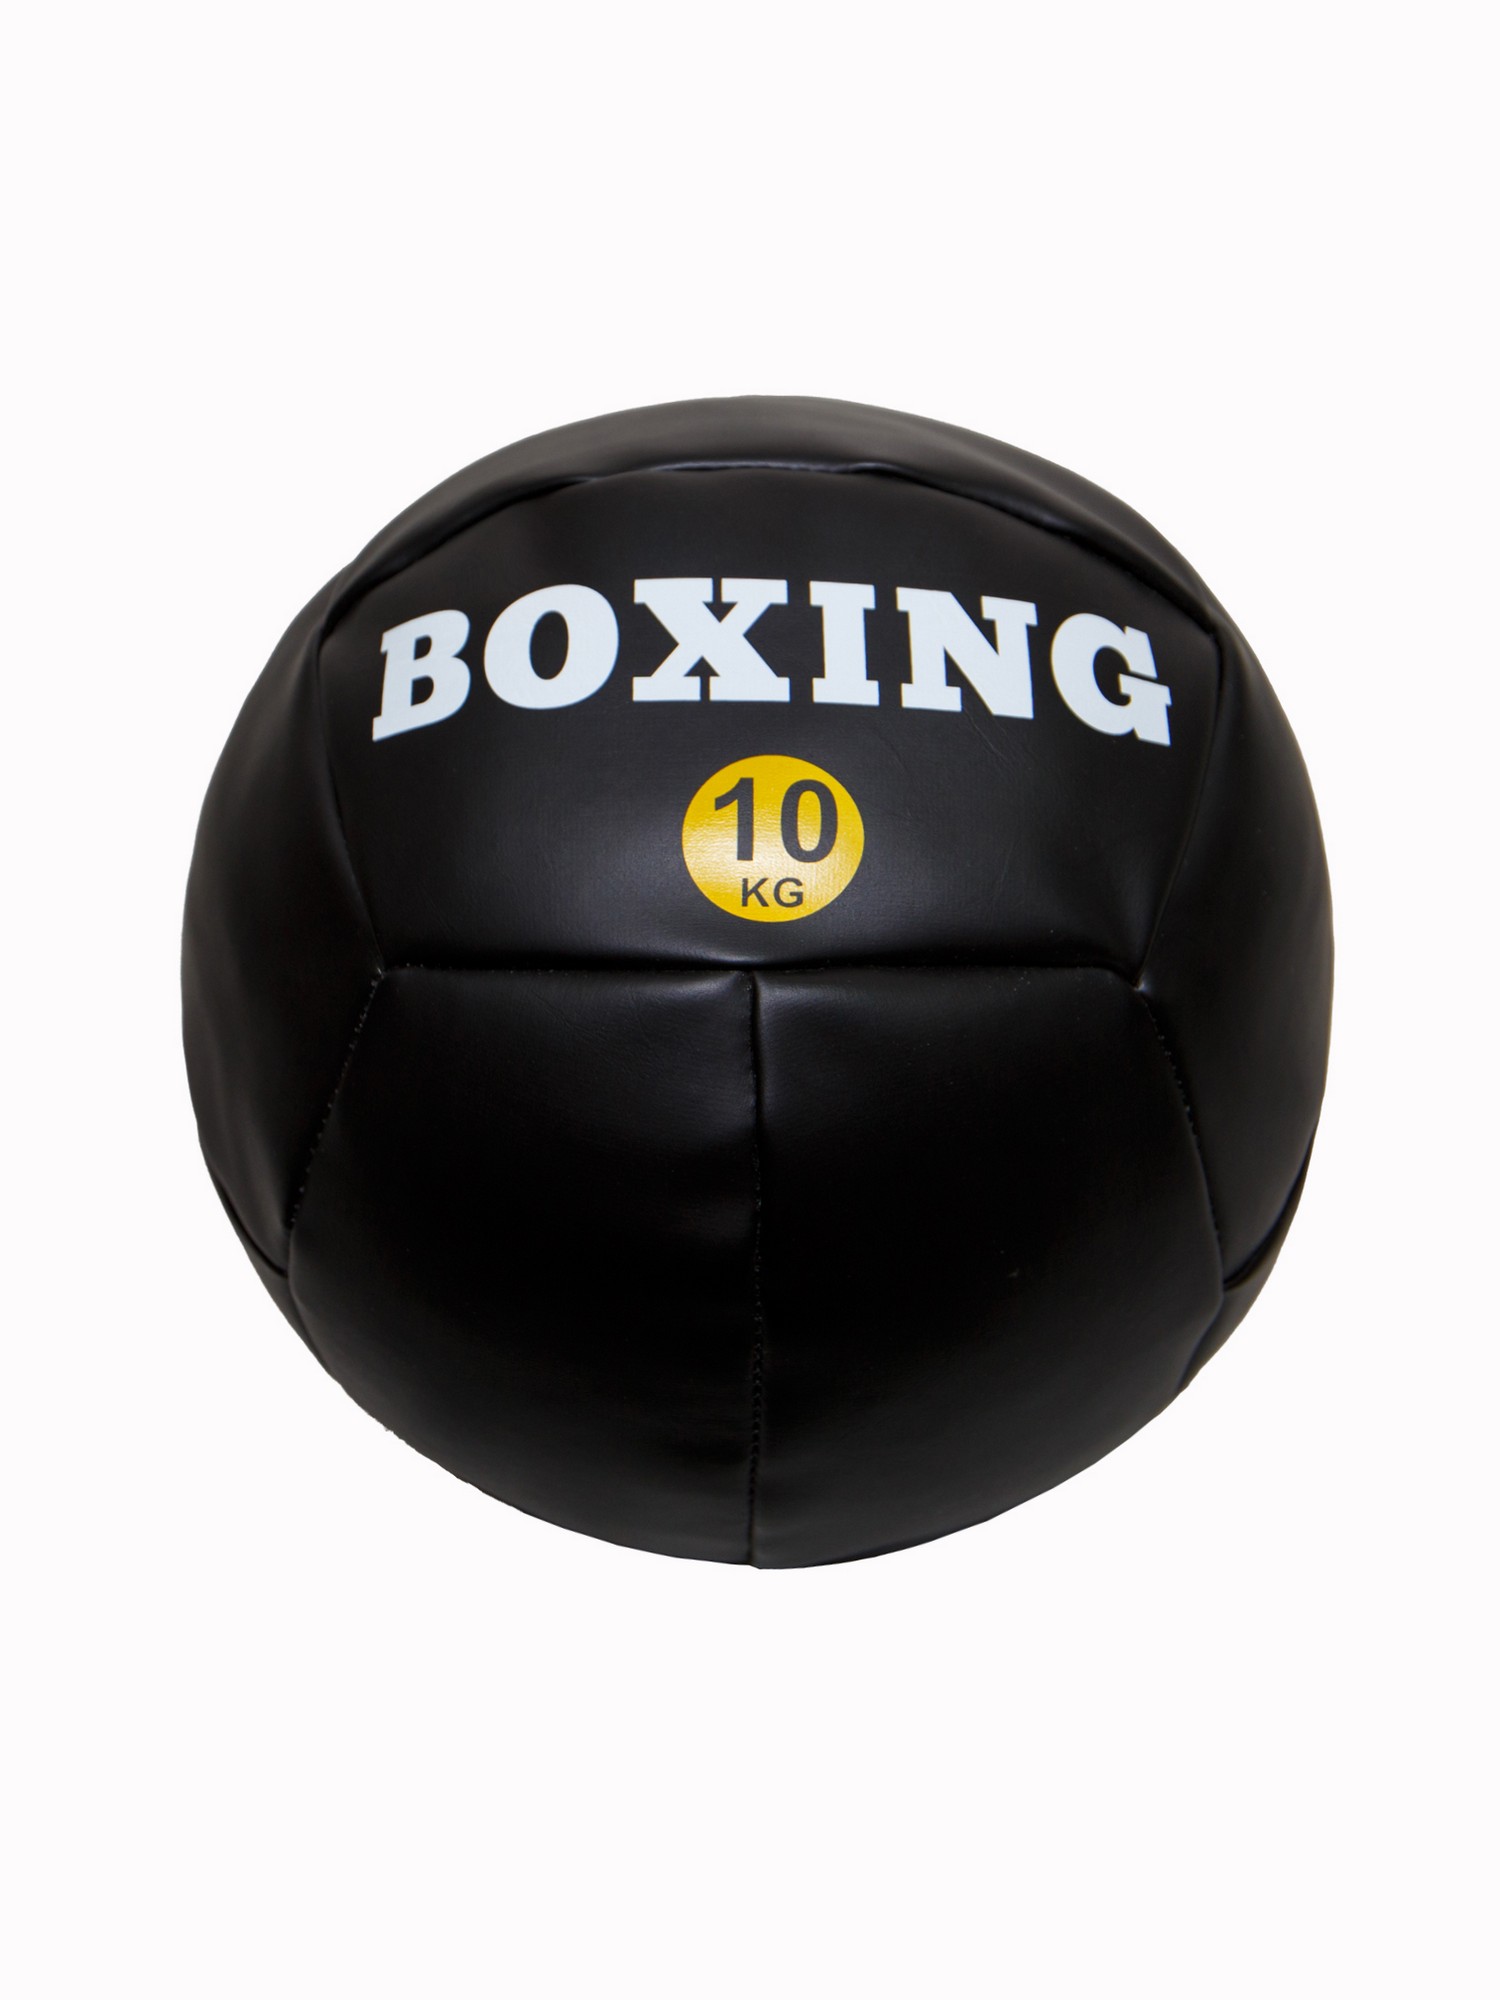 Медицинбол 10кг Totalbox Boxing МДИБ-10 1500_2000